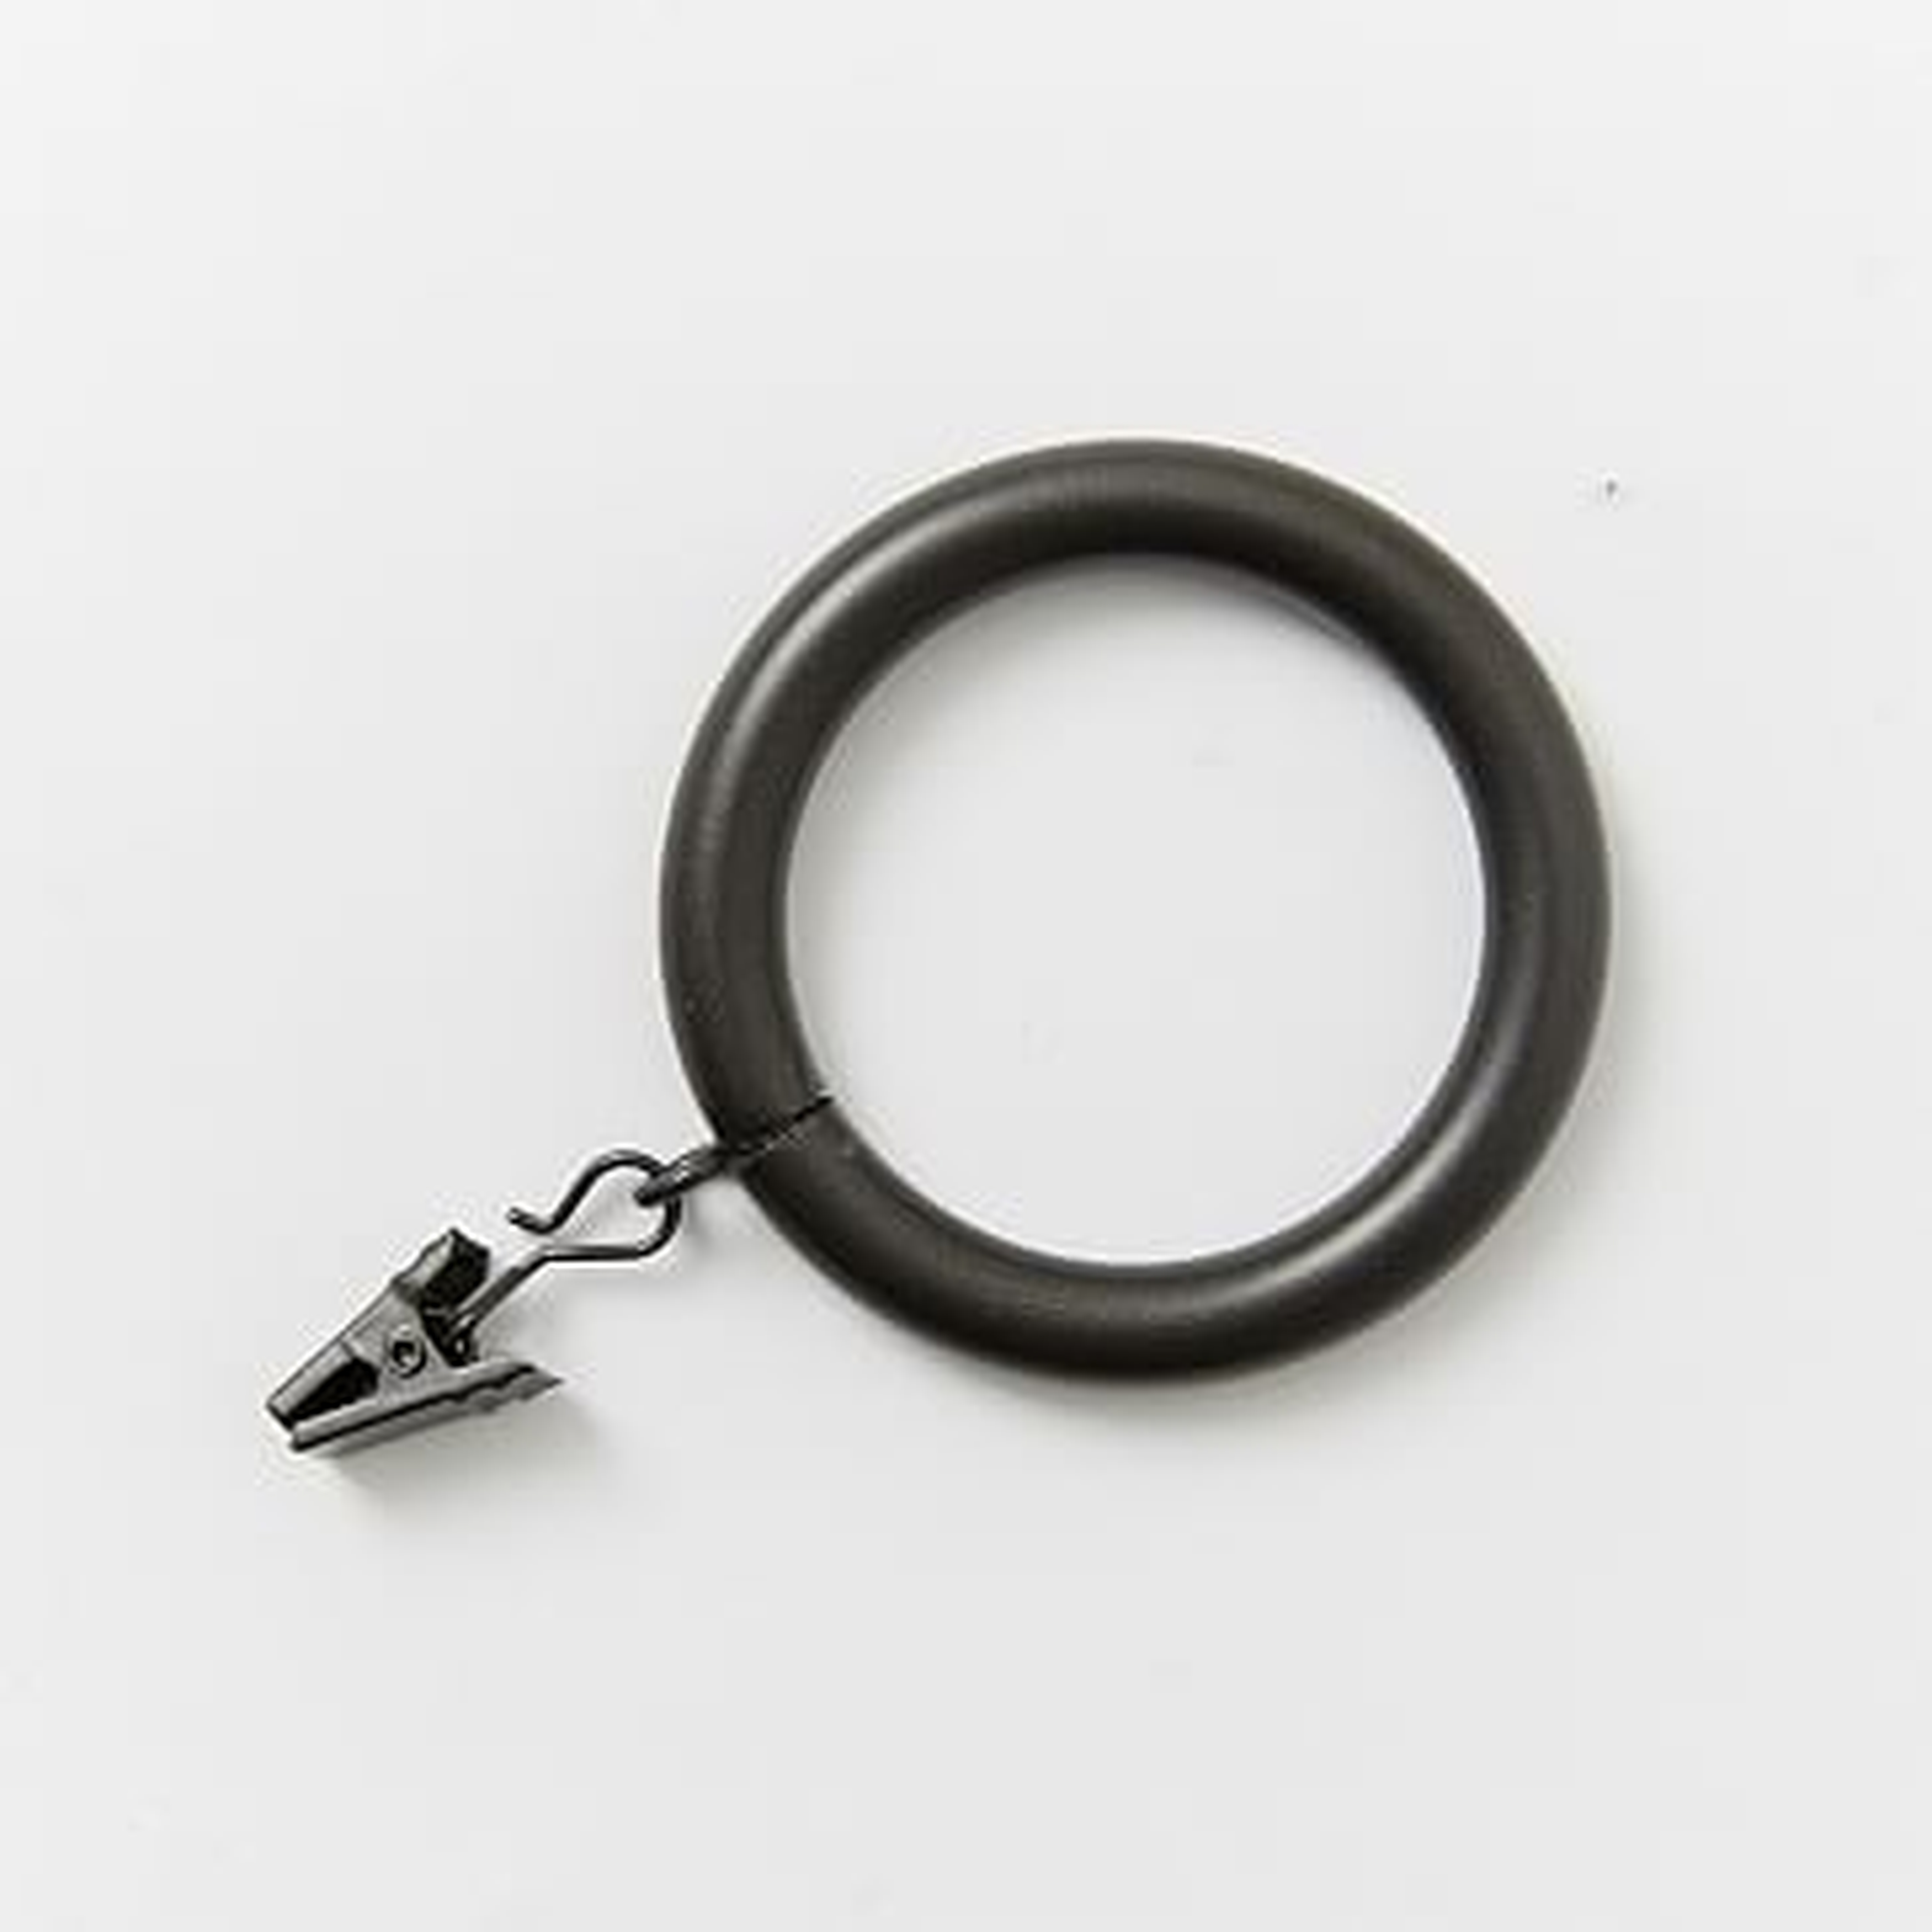 Oversized Metal Curtain Ring With Clip, Set of 7, Gunmetal - West Elm